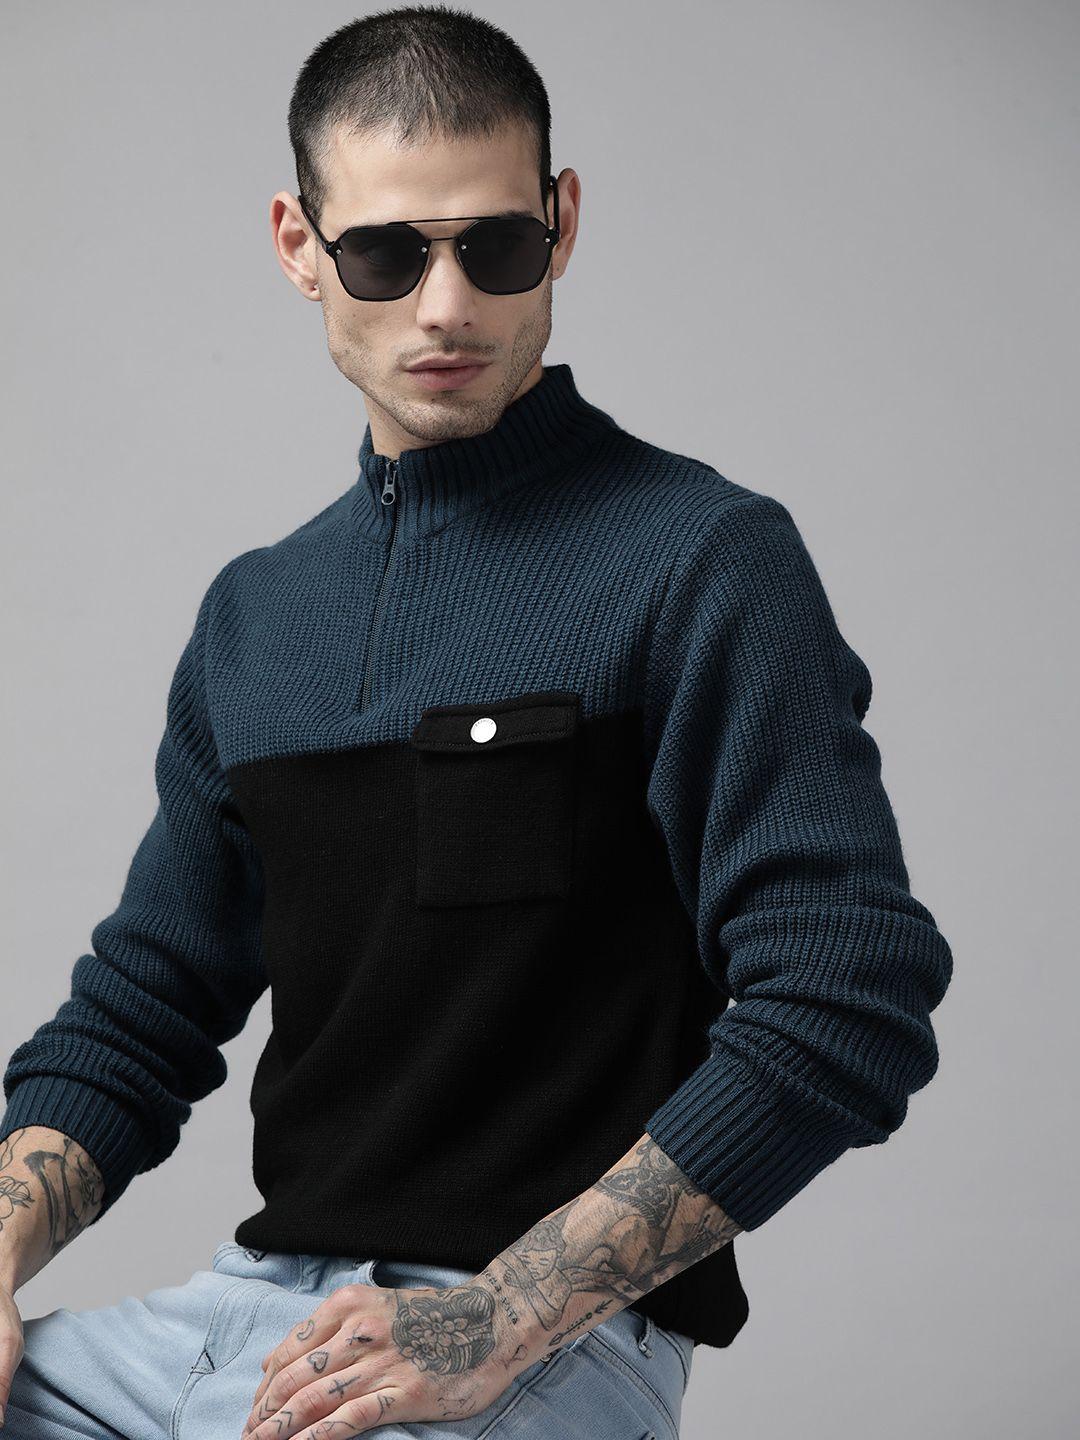 the roadster lifestyle co. men teal blue & black colourblocked pullover with pocket detail